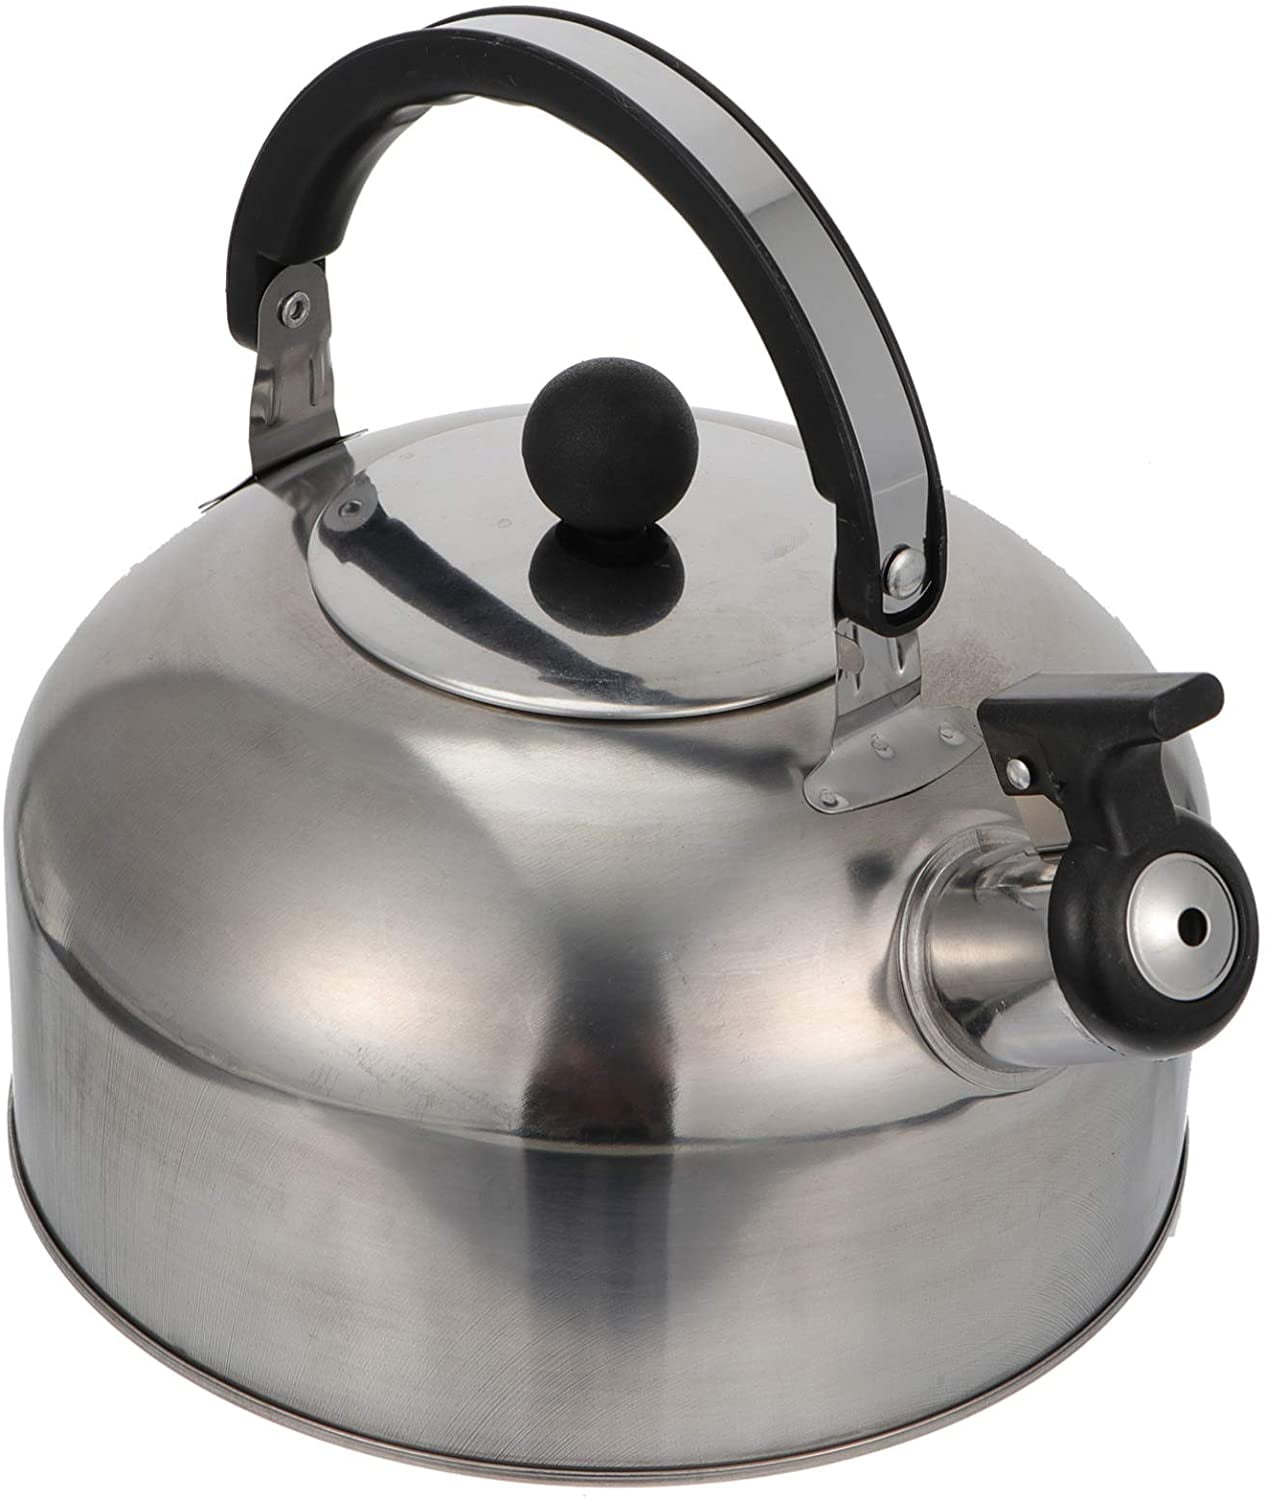 New Stainless Steel Silver Whistling Kettle Electric Stove Gas Hob Camping Boat 